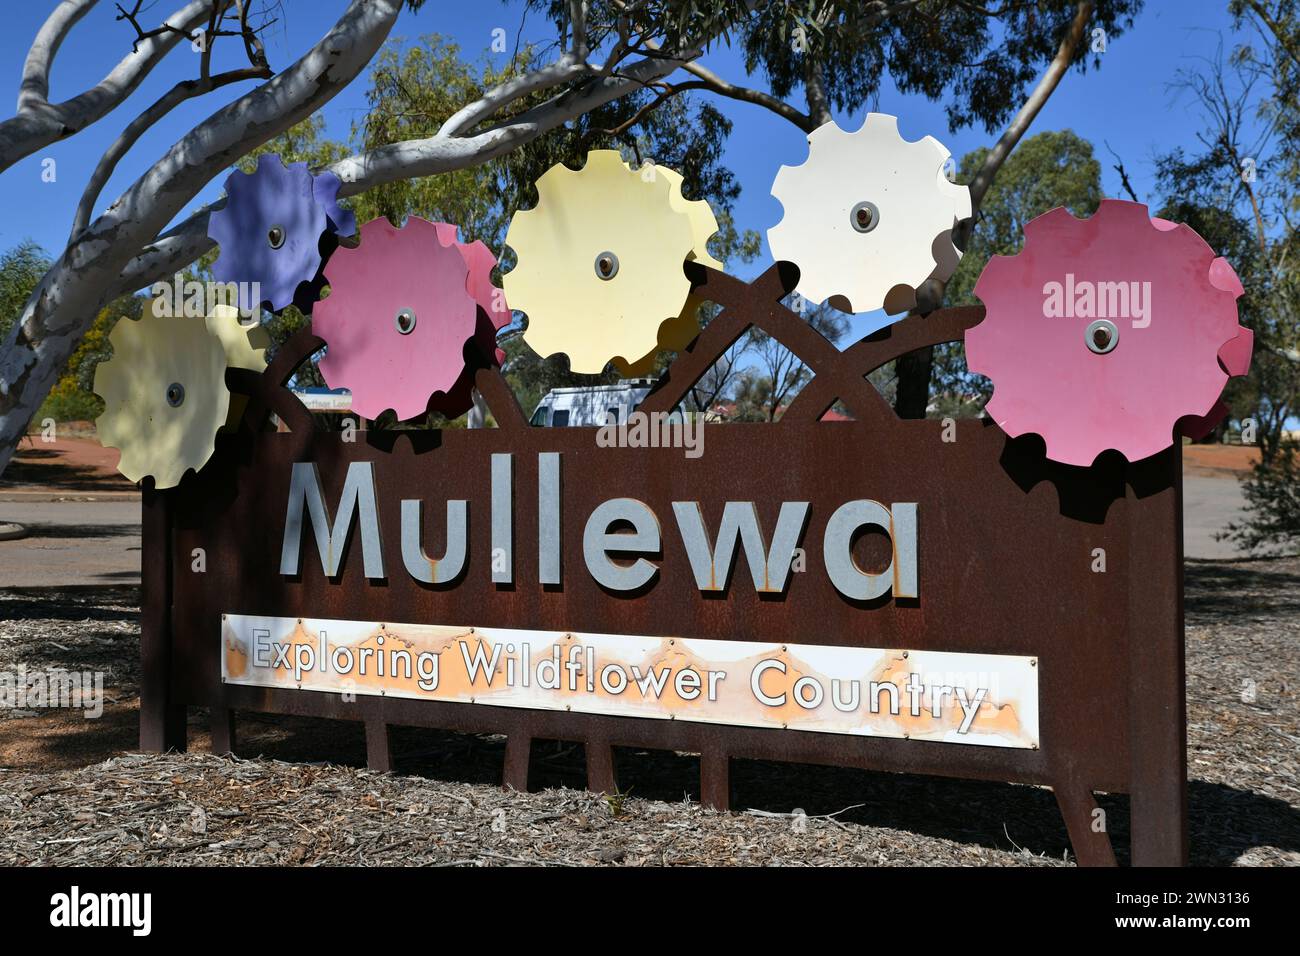 Mullewa welcome sign in the town of Mullewa, the heart of wildflower country in Western Australia Stock Photo